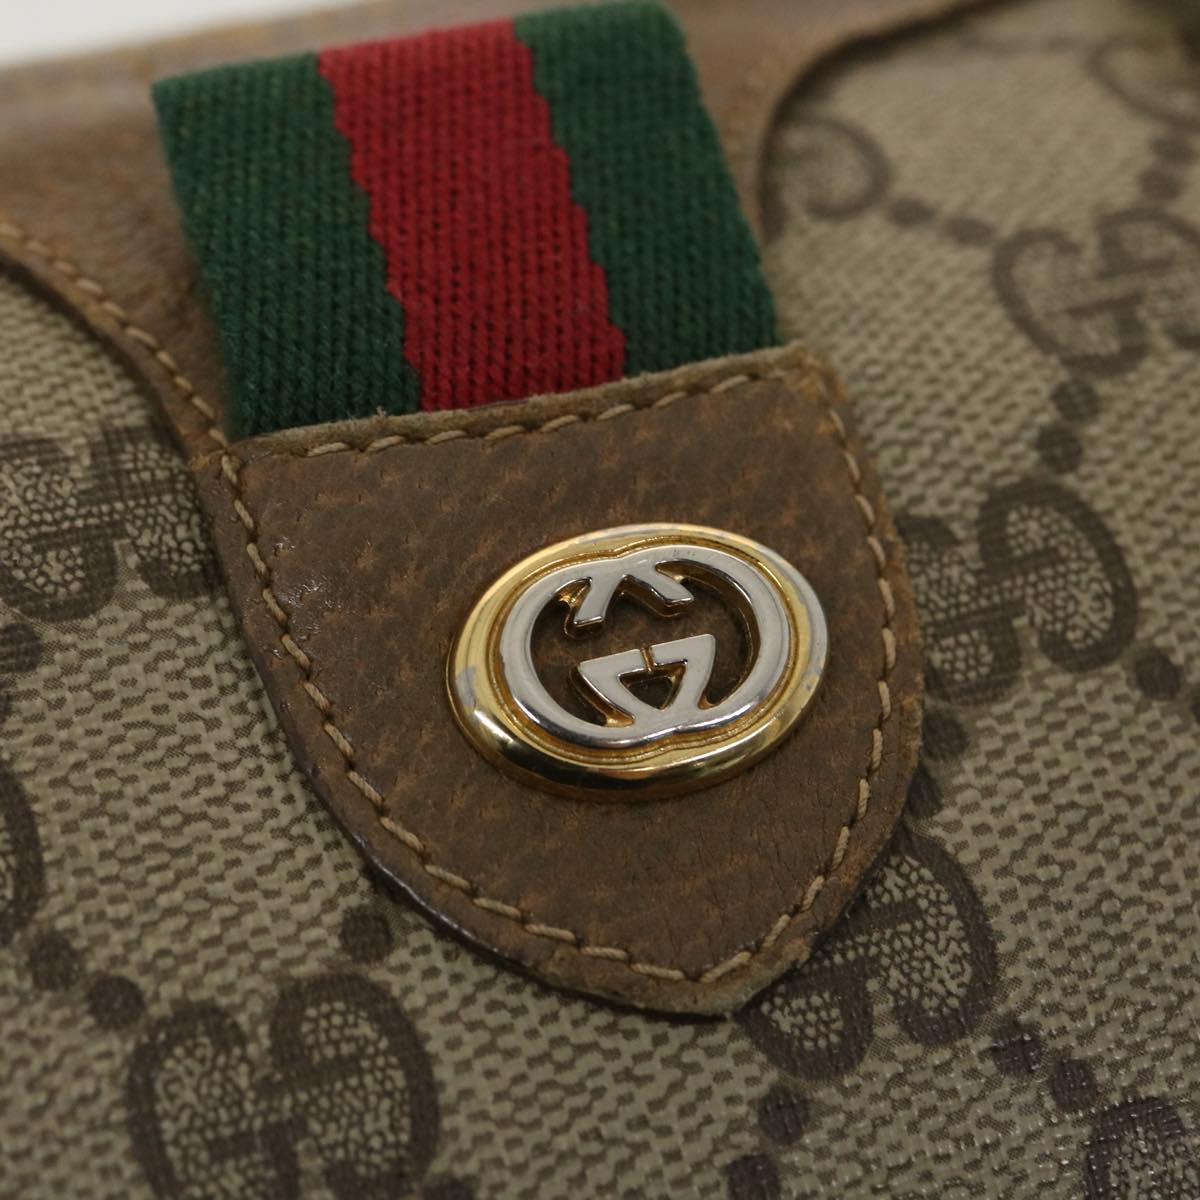 GUCCI GG Canvas Web Sherry Line Boston Bag Beige Red Green 40.02.007 Auth 38308